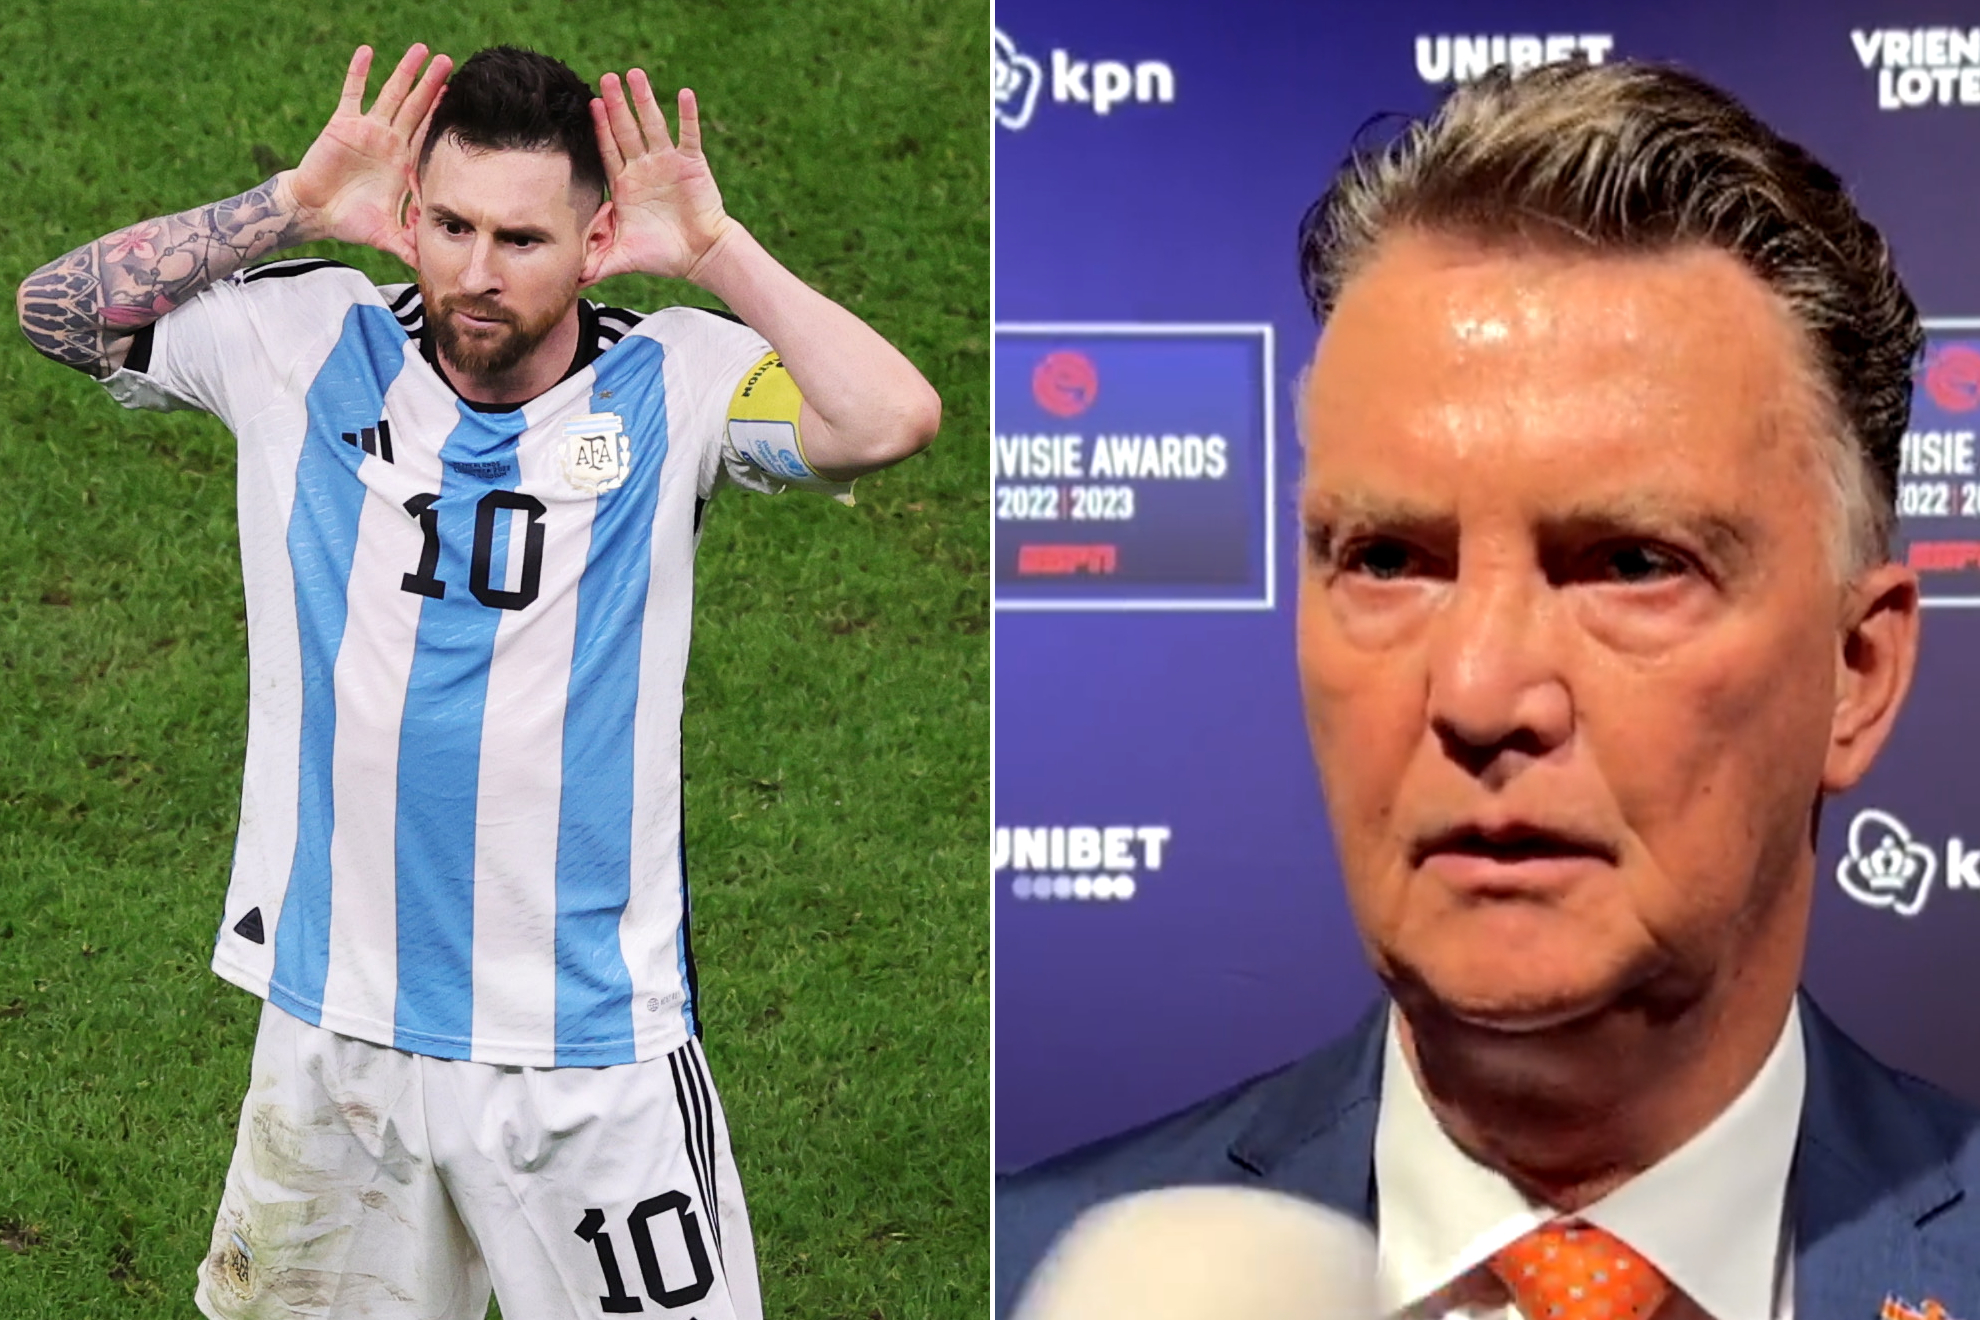 Van Gaal suggests the Qatar World Cup was rigged in Messis favor